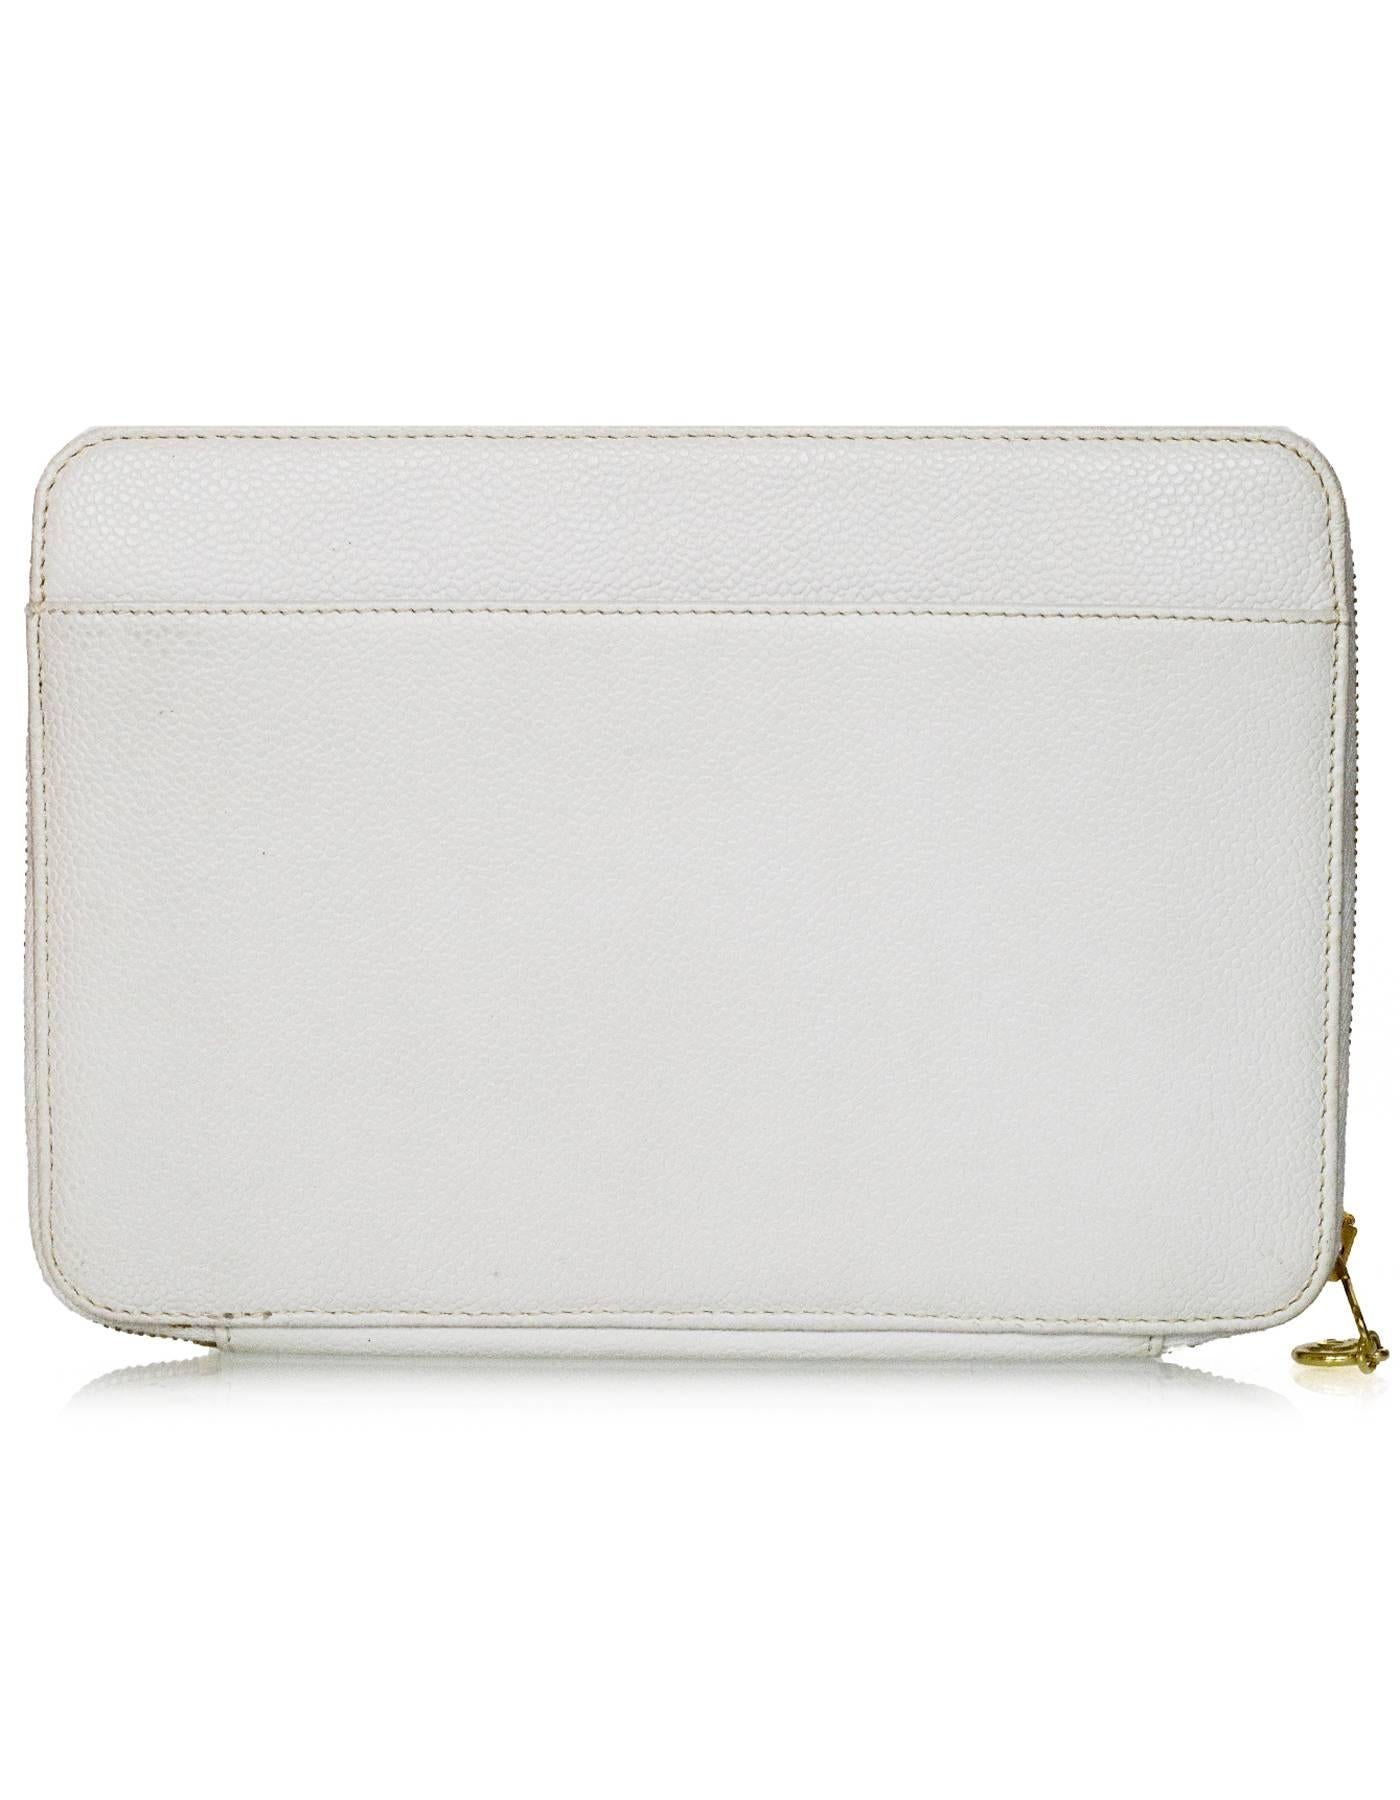 Chanel White Caviar Leather Timeless CC XLClutch/Folio 
Features CC stitched on front panel

Made In: Italy
Year of Production: 1997-1999
Color: White
Hardware: Goldtone
Materials: Caviar leather
Lining: Beige nylon
Closure/Opening: Zip around